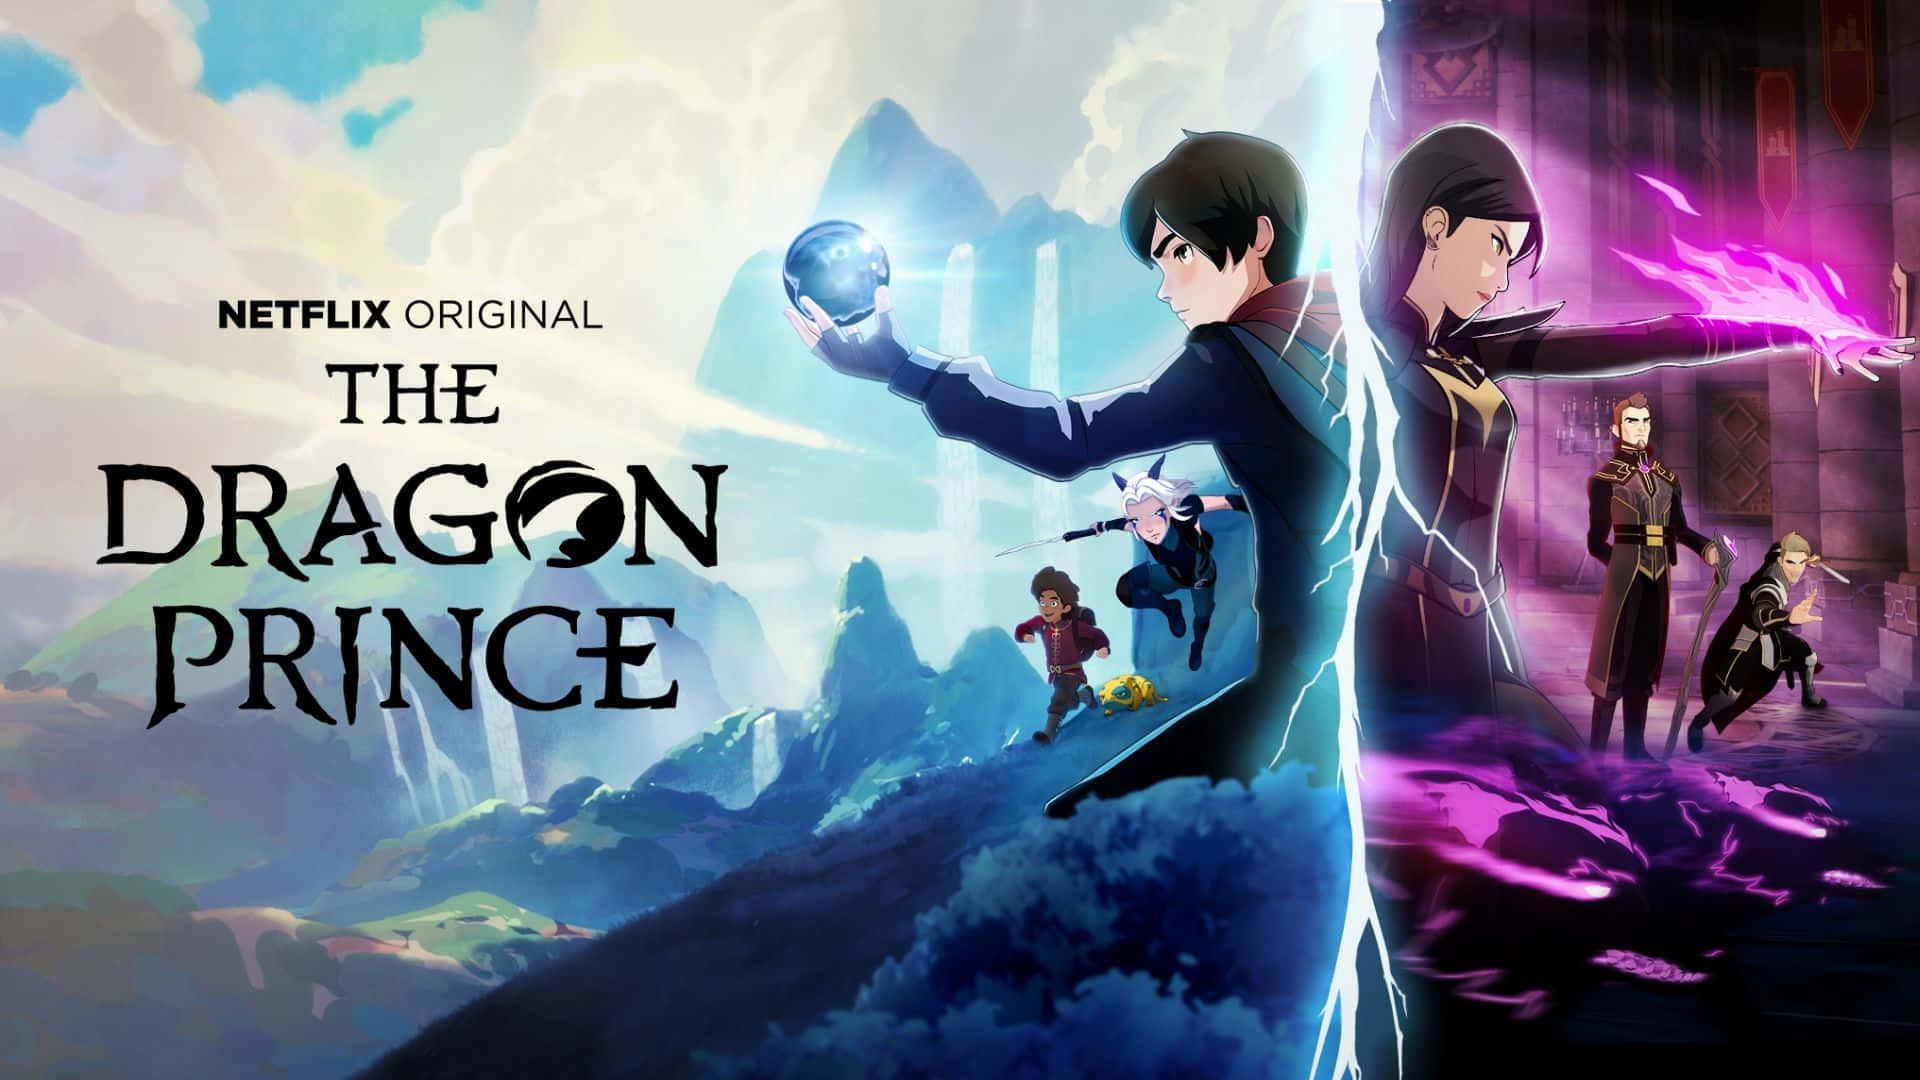 Two heroes united - Callum and Ezran stand united against their enemies in The Dragon Prince Wallpaper